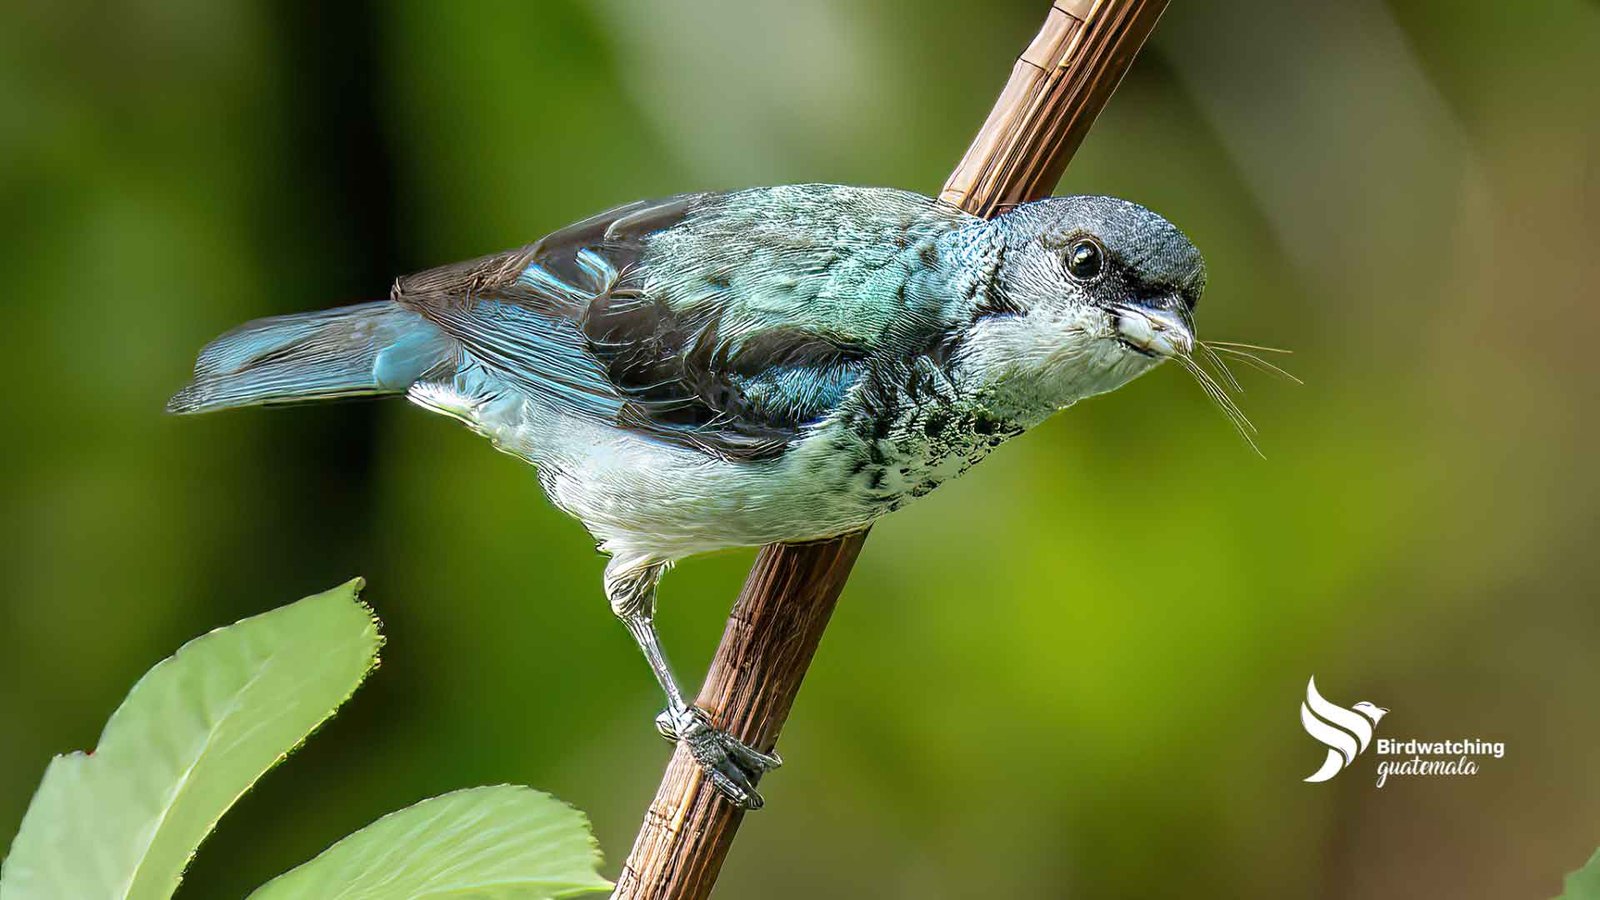 
An Azure-rumped Tanager carries nesting materials in its beak, set against a green forest background in Guatemala. This vibrant bird is characterized by its striking, colorful plumage, which contrasts beautifully with the natural surroundings. Ideal for articles focusing on birdwatching in Guatemala.
